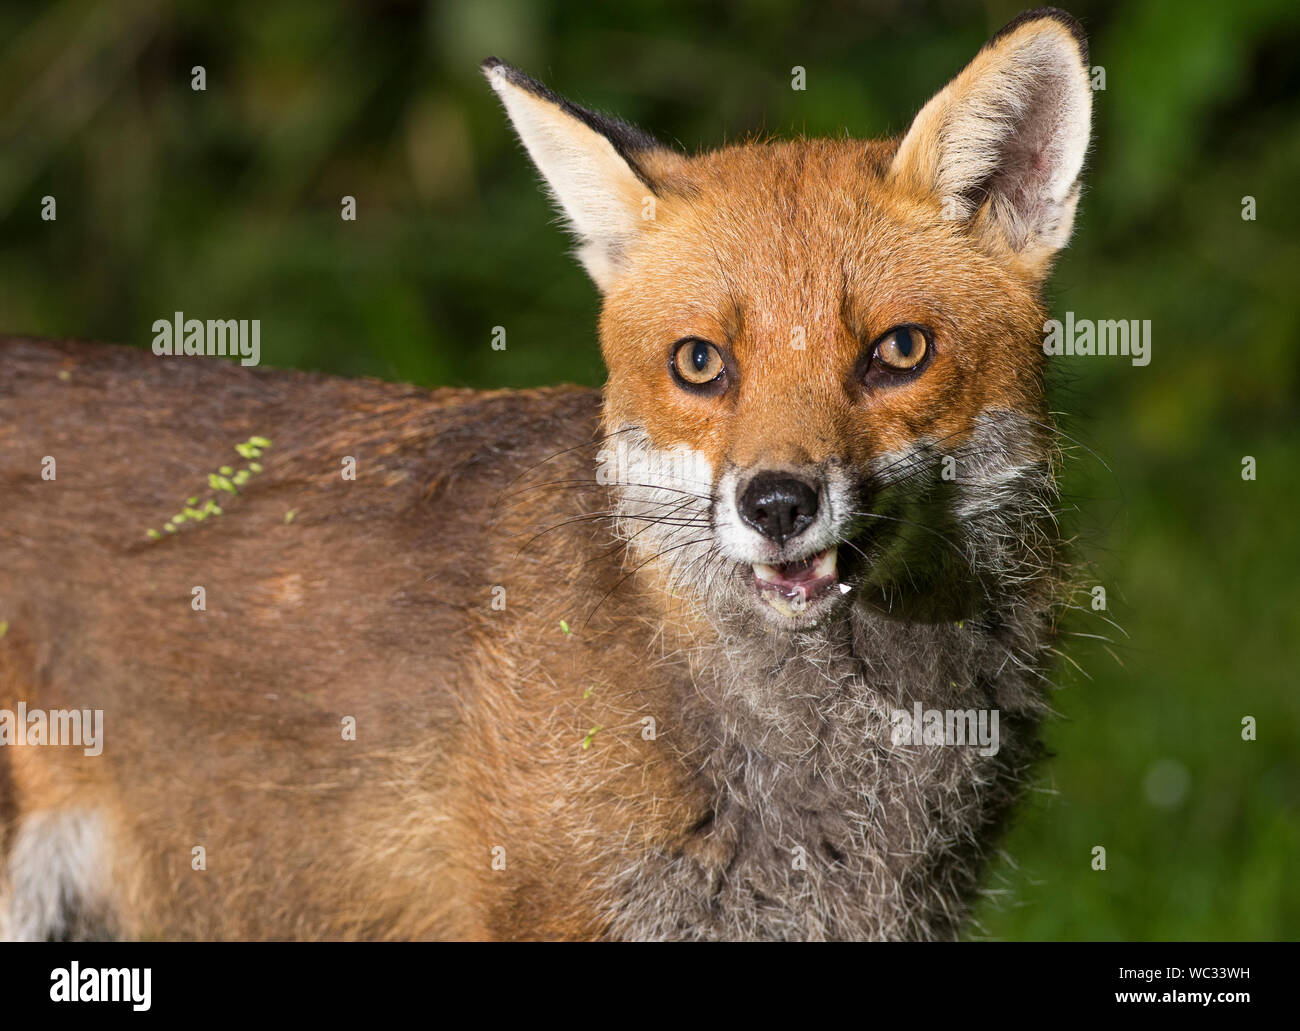 Close up of an urban European Red Fox (Vulpes vulpes) at night on grass in England. Stock Photo